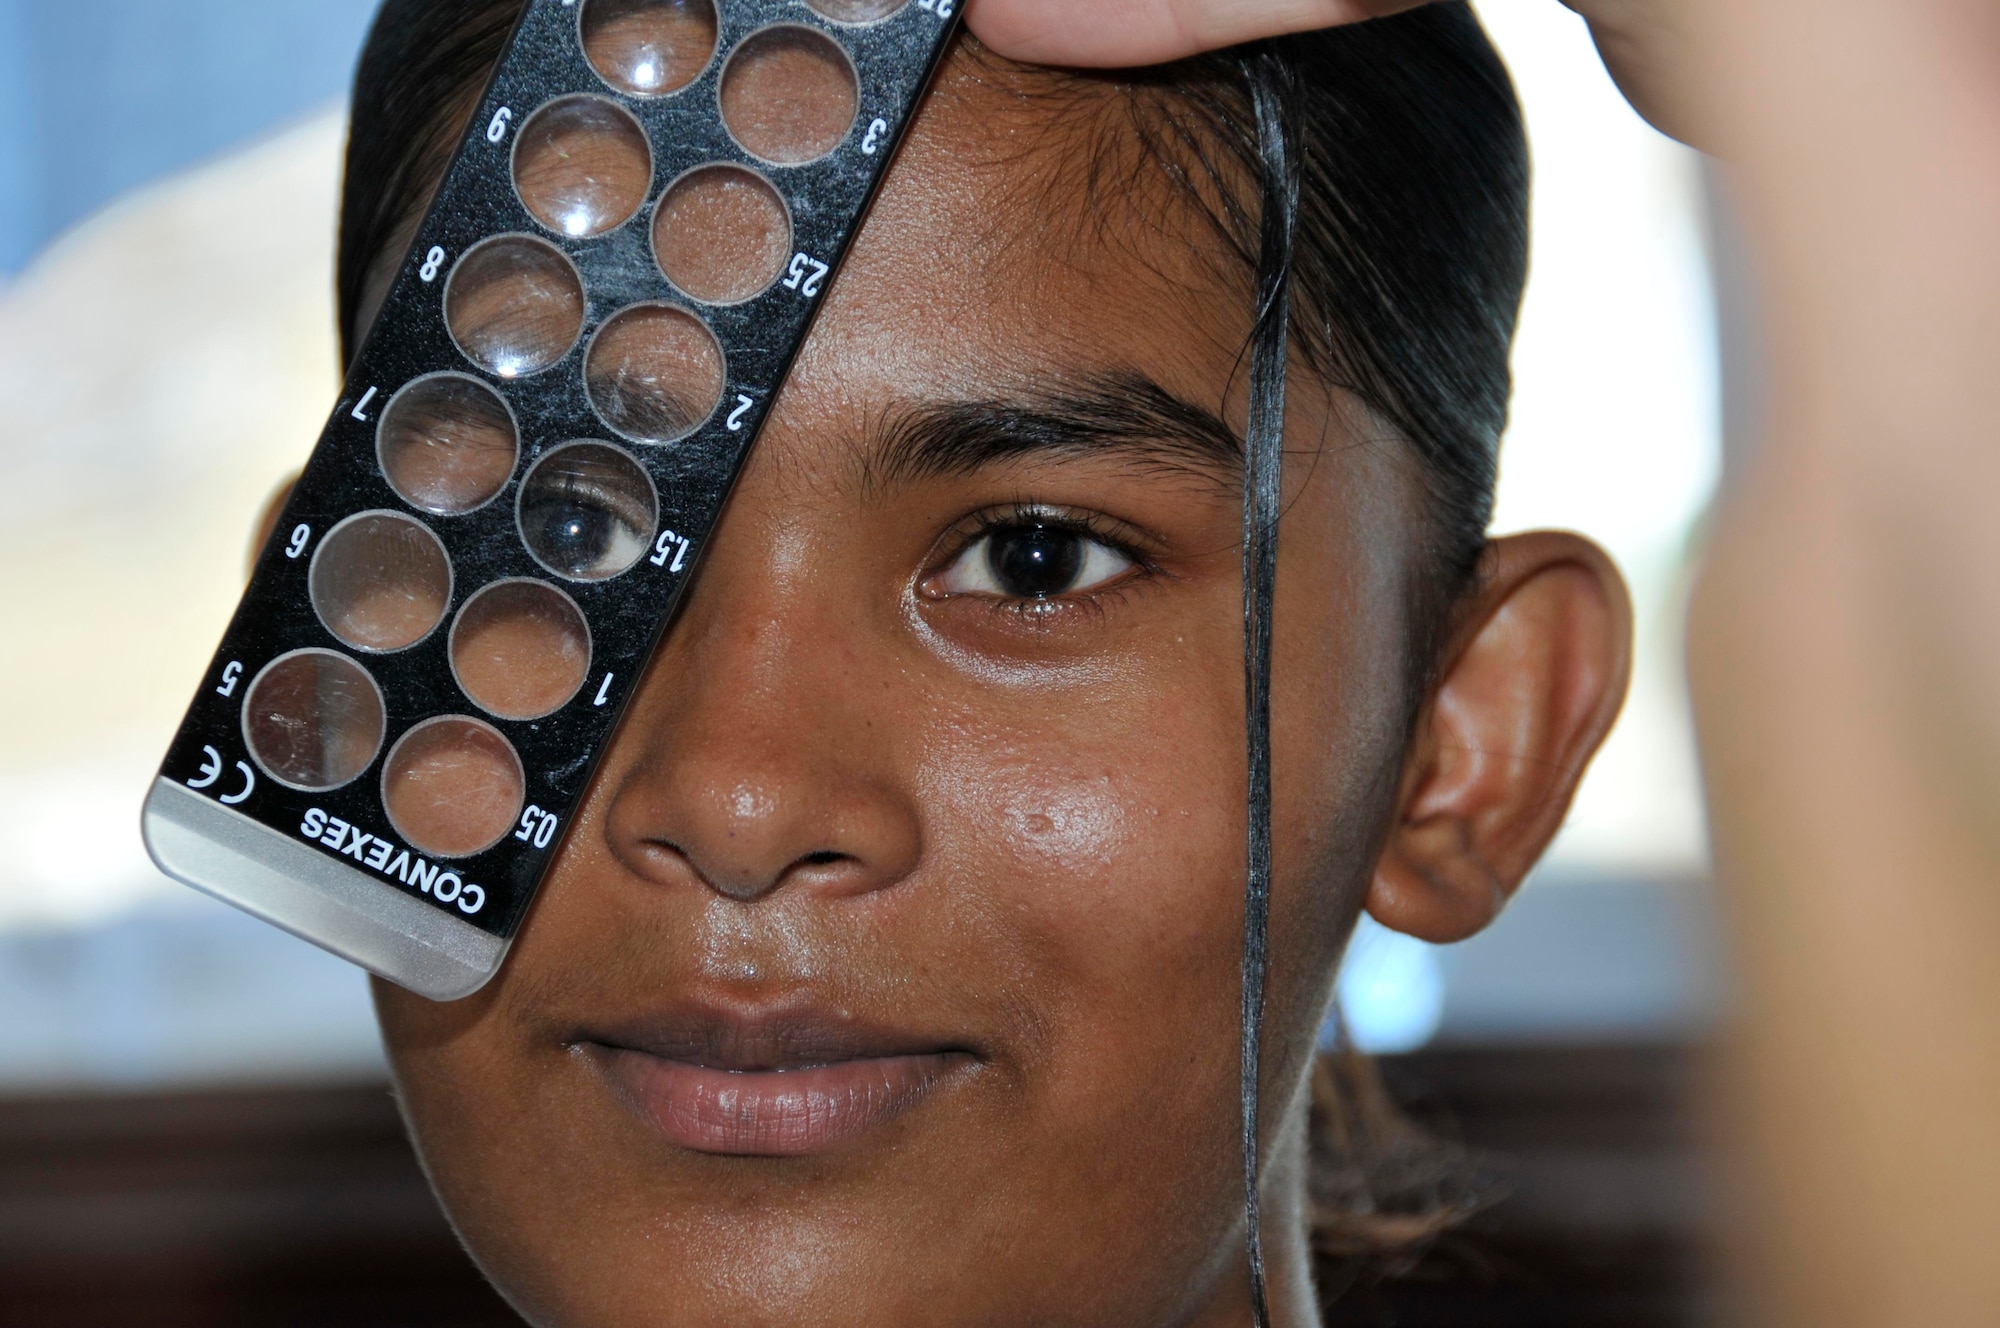 A Guyanese girl from Joshua's Place Orphanage recieves an eye check up Aug 18, 2009 at the Timehri School in Georgetown, Guayan. Airmen treated more than 60 children from the orphanage. (U.S. Air Force photo by Airman 1st Class Perry Aston) (Released)